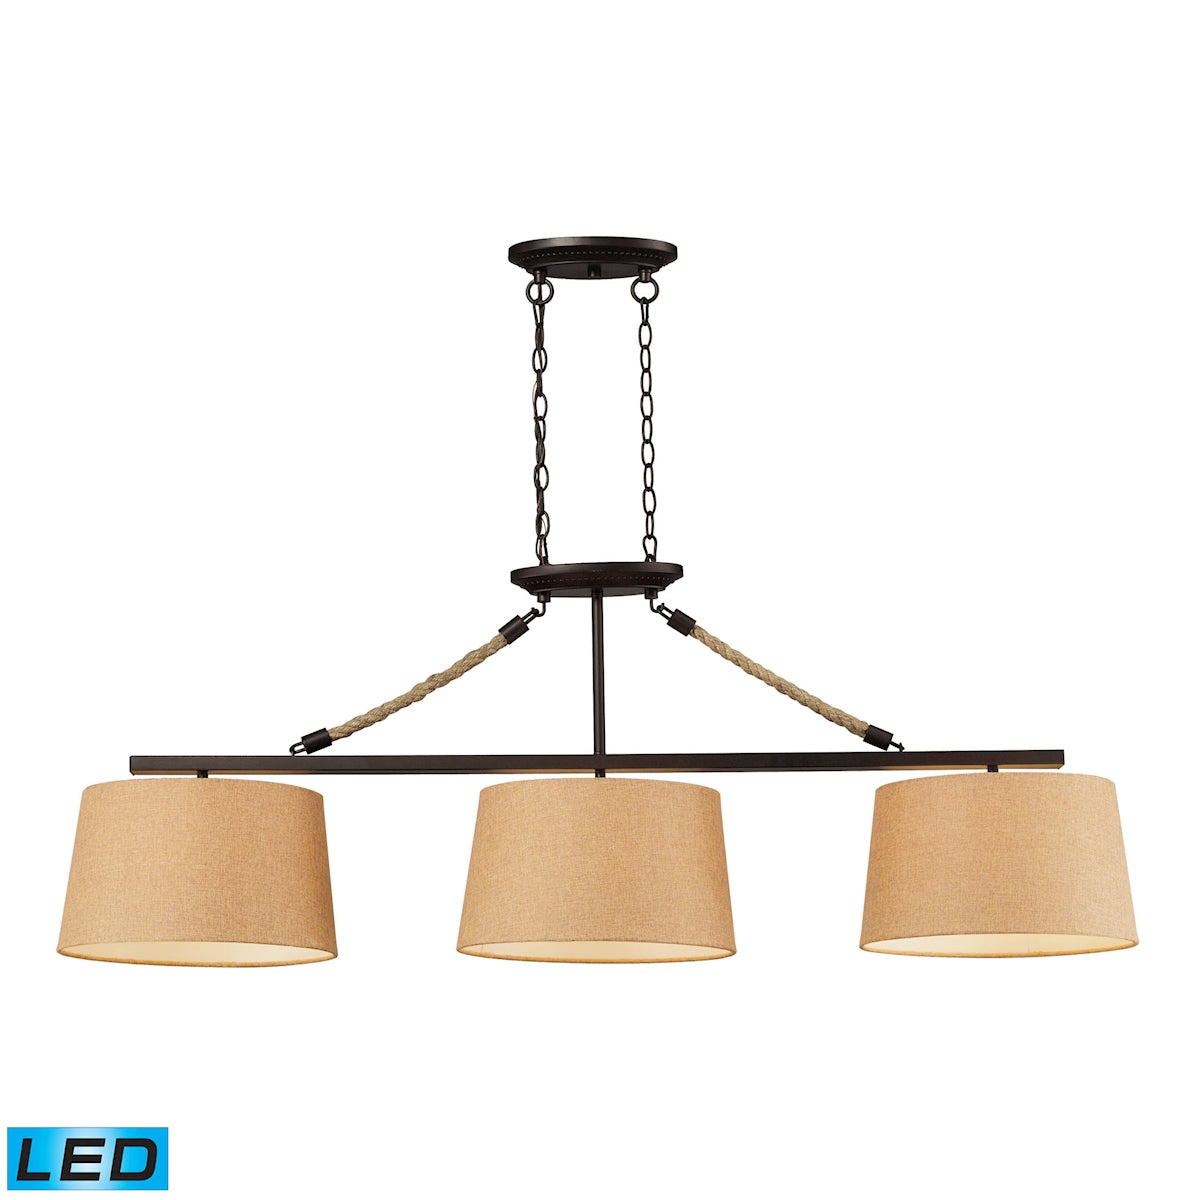 ELK Lighting 73046-3-LED Natural Rope 3-Light Island Light in Aged Bronze with Tan Linen Shades - Includes LED Bulbs